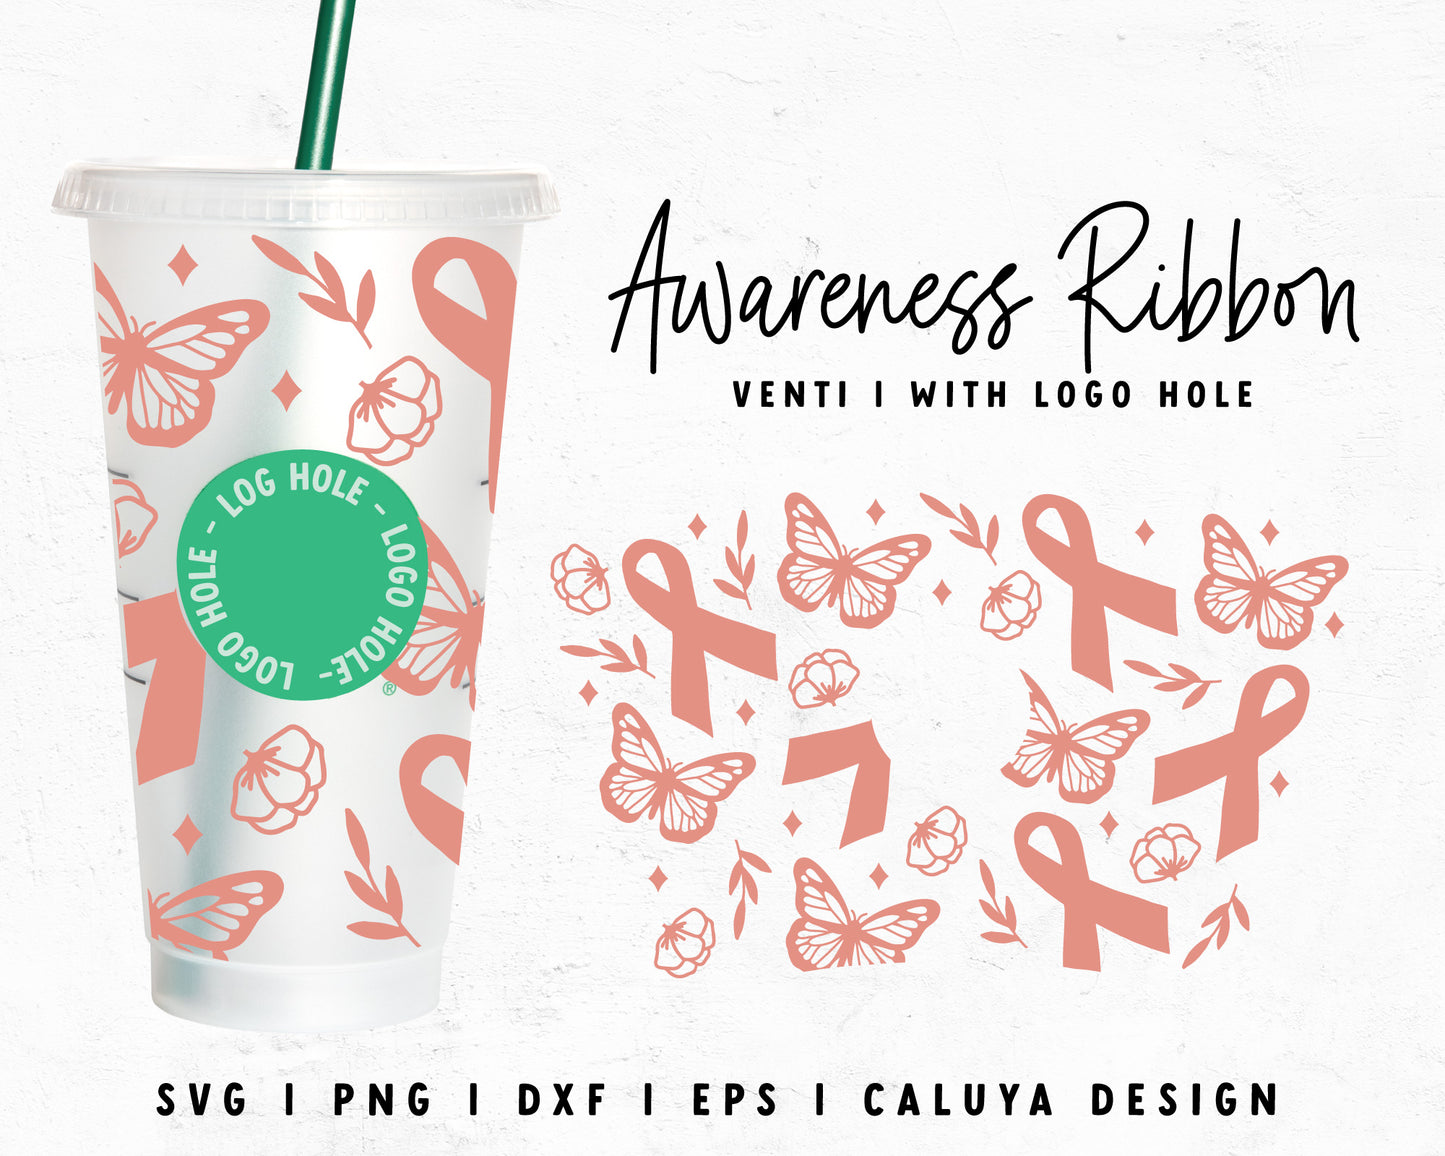 Venti Cup With HoleRibbons With Butterflies Wrap Cut File for Cricut, Cameo Silhouette | Free SVG Cut File